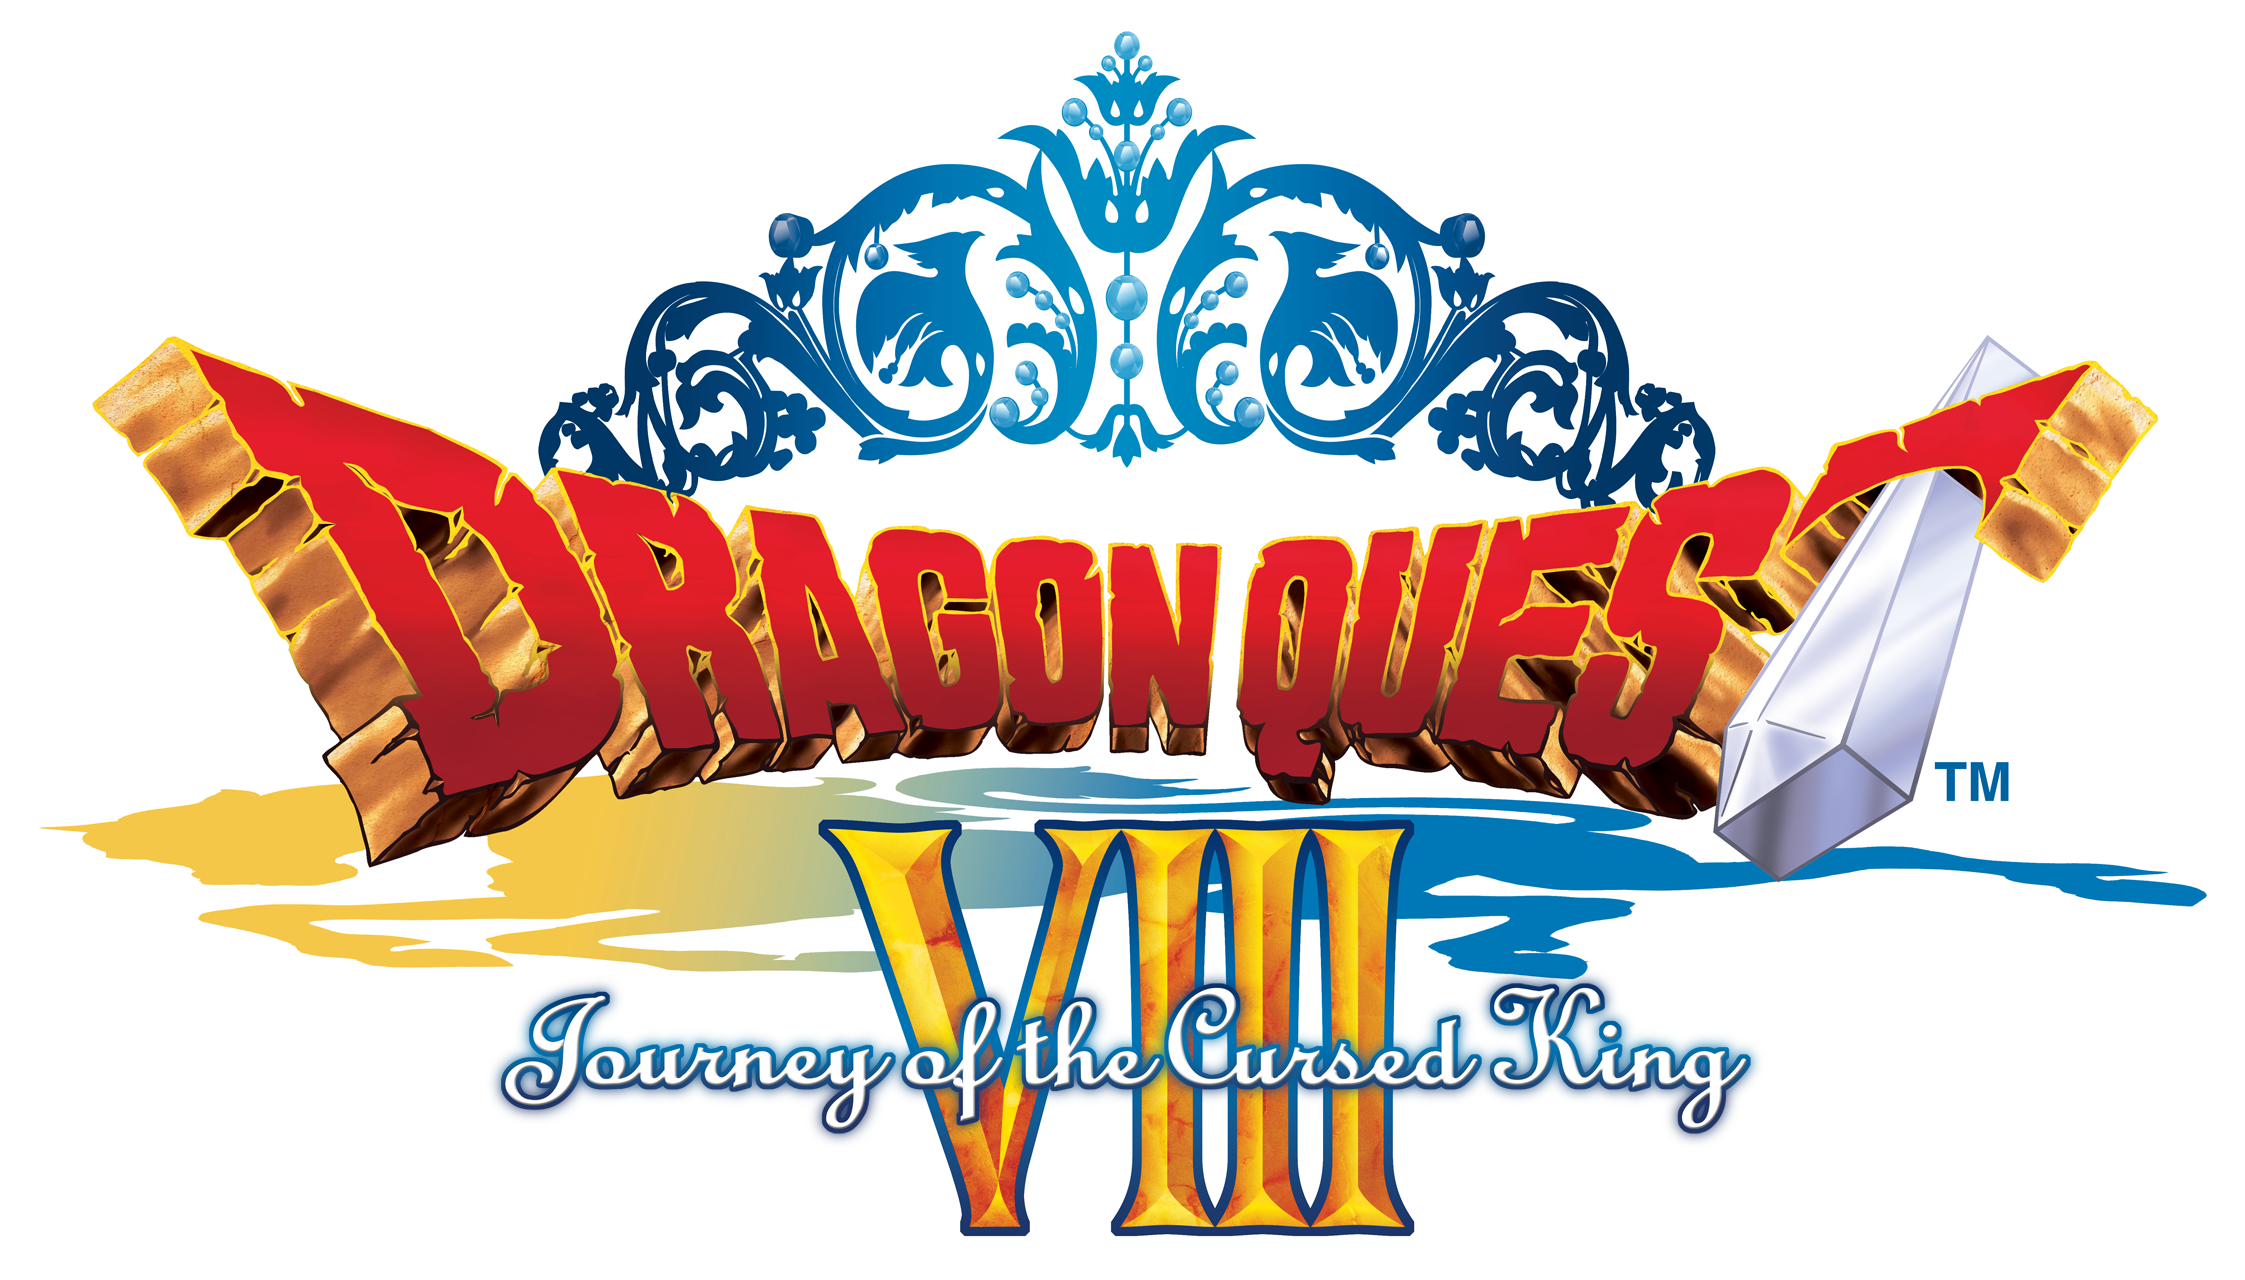 Dragon Quest VIII: Journey of the Cursed King and Dragon Quest 